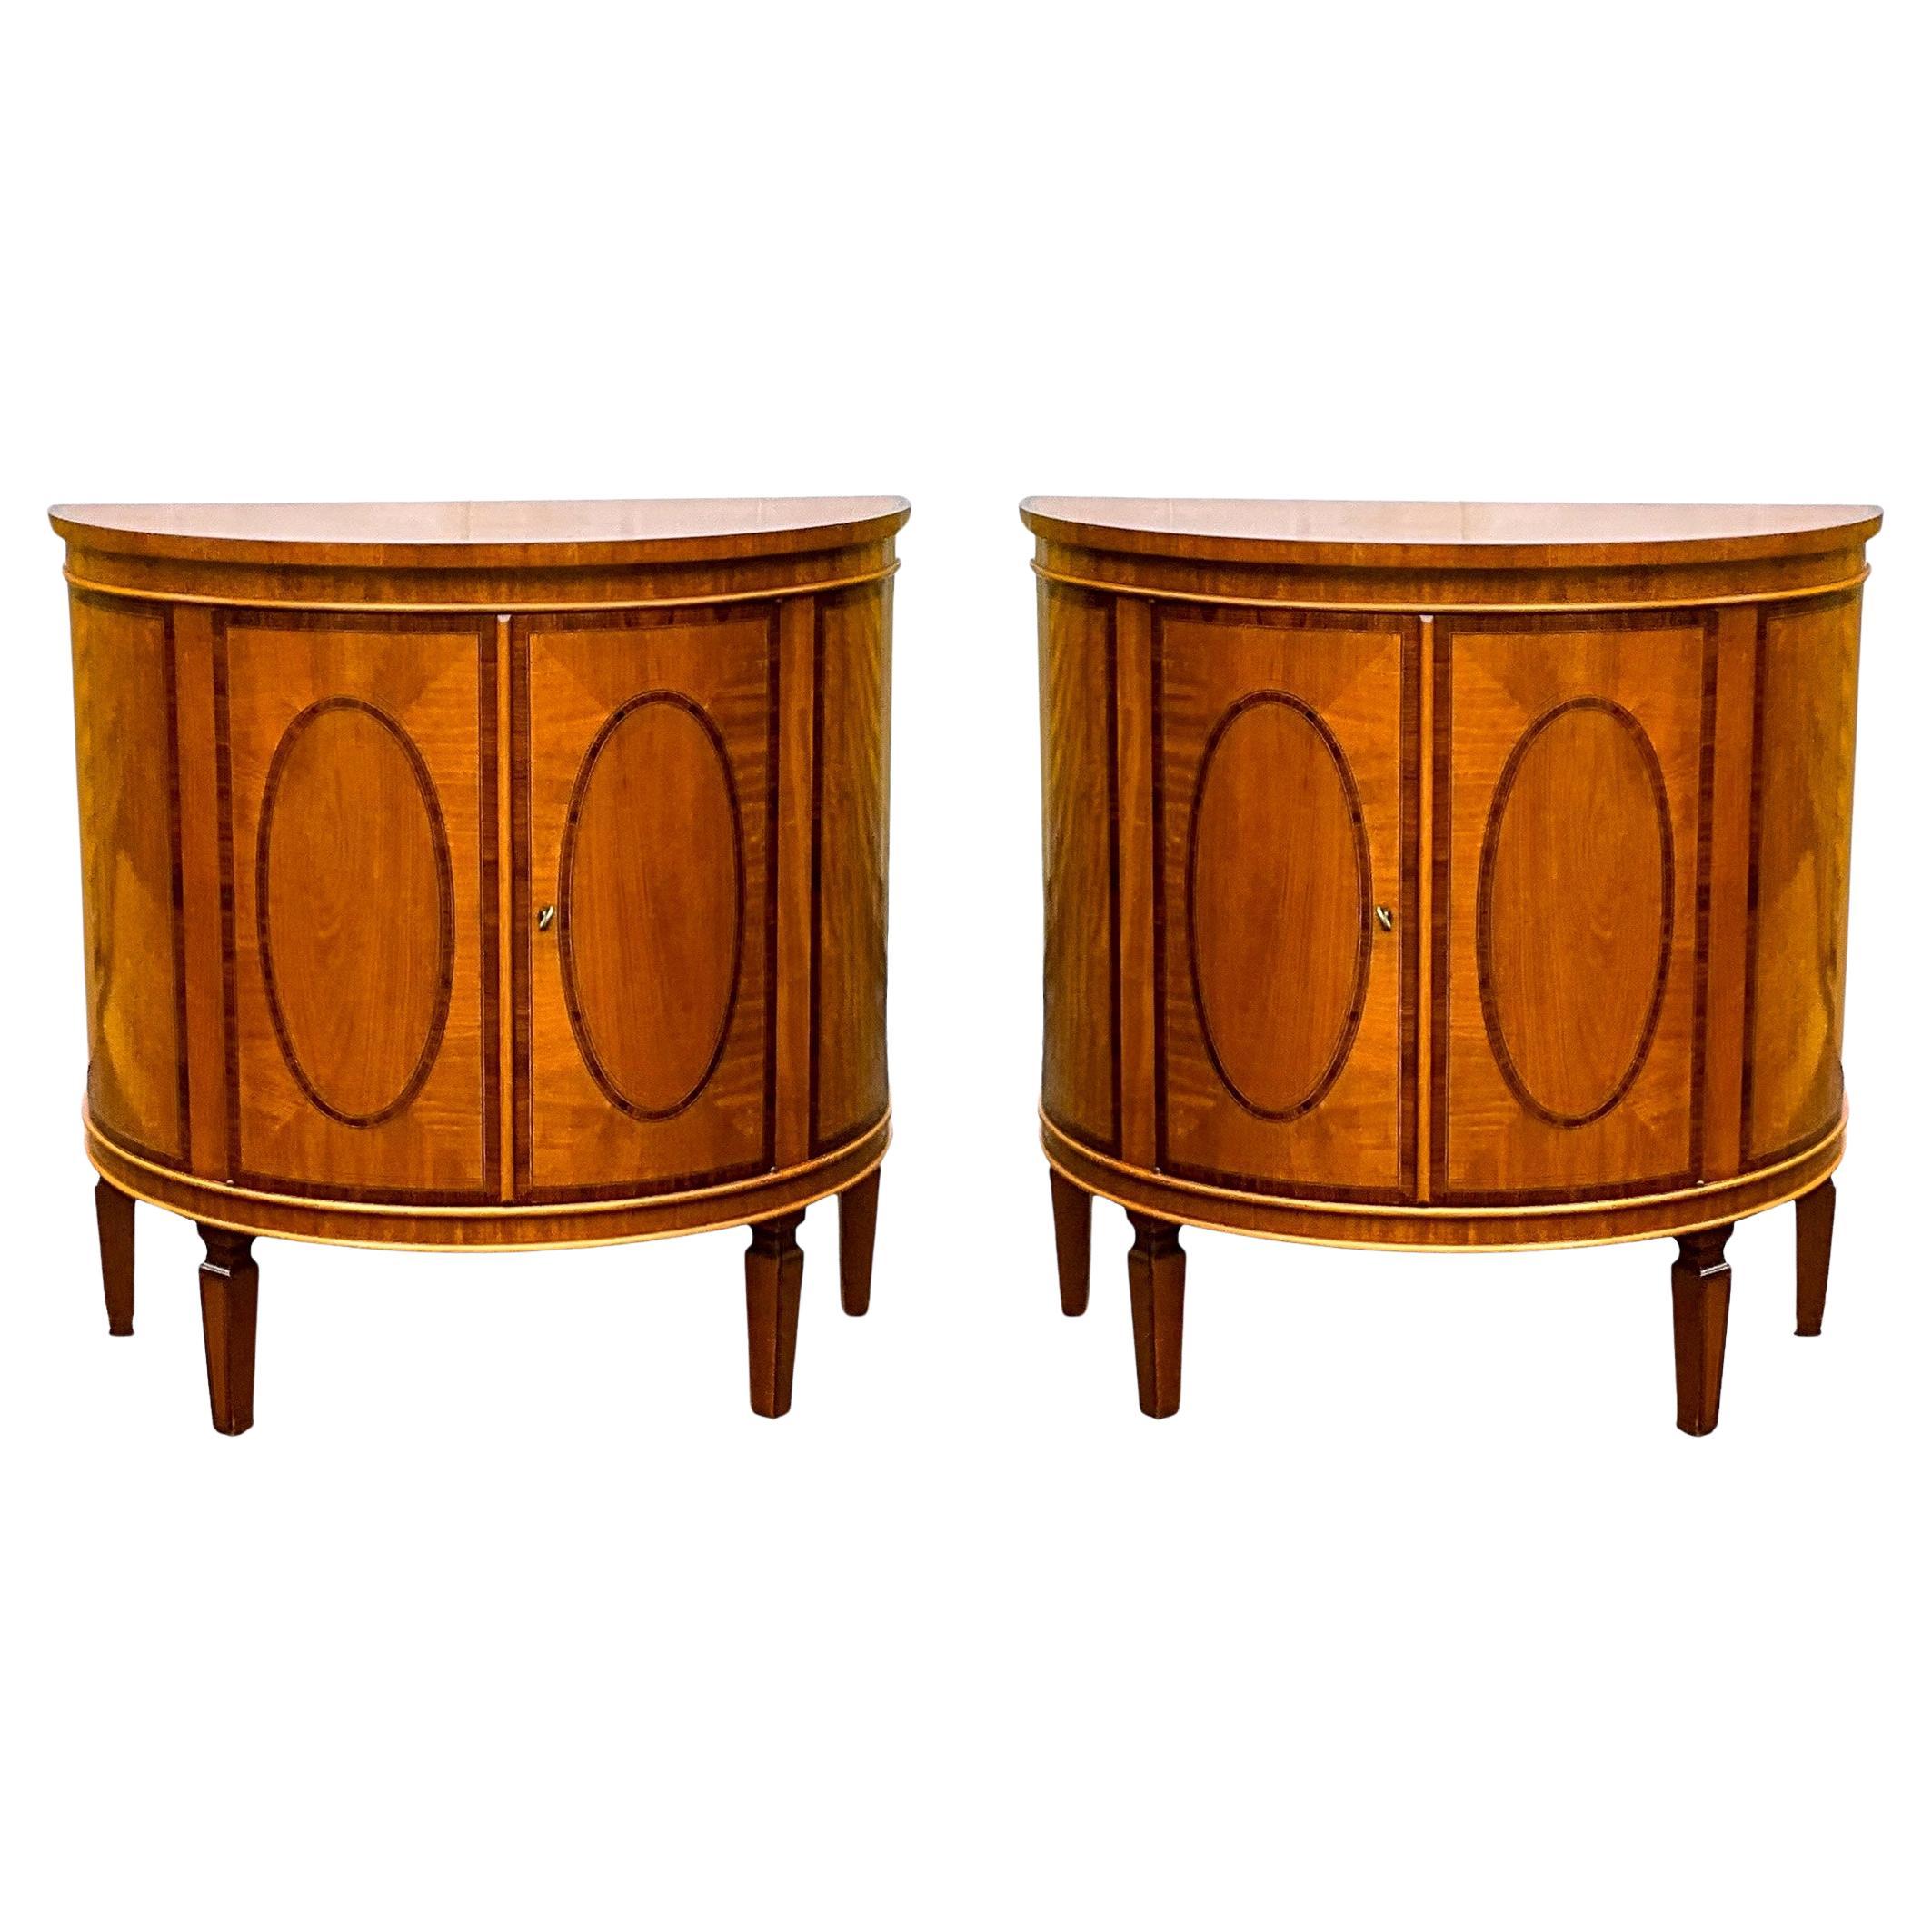 This is a lovely pair of Italian inlaid and banded satinwood demilune cabinets attributed to Decorative Crafts. They are in very good condition with each having a single interior shelf and key. They pair are not marked and date to the later part of